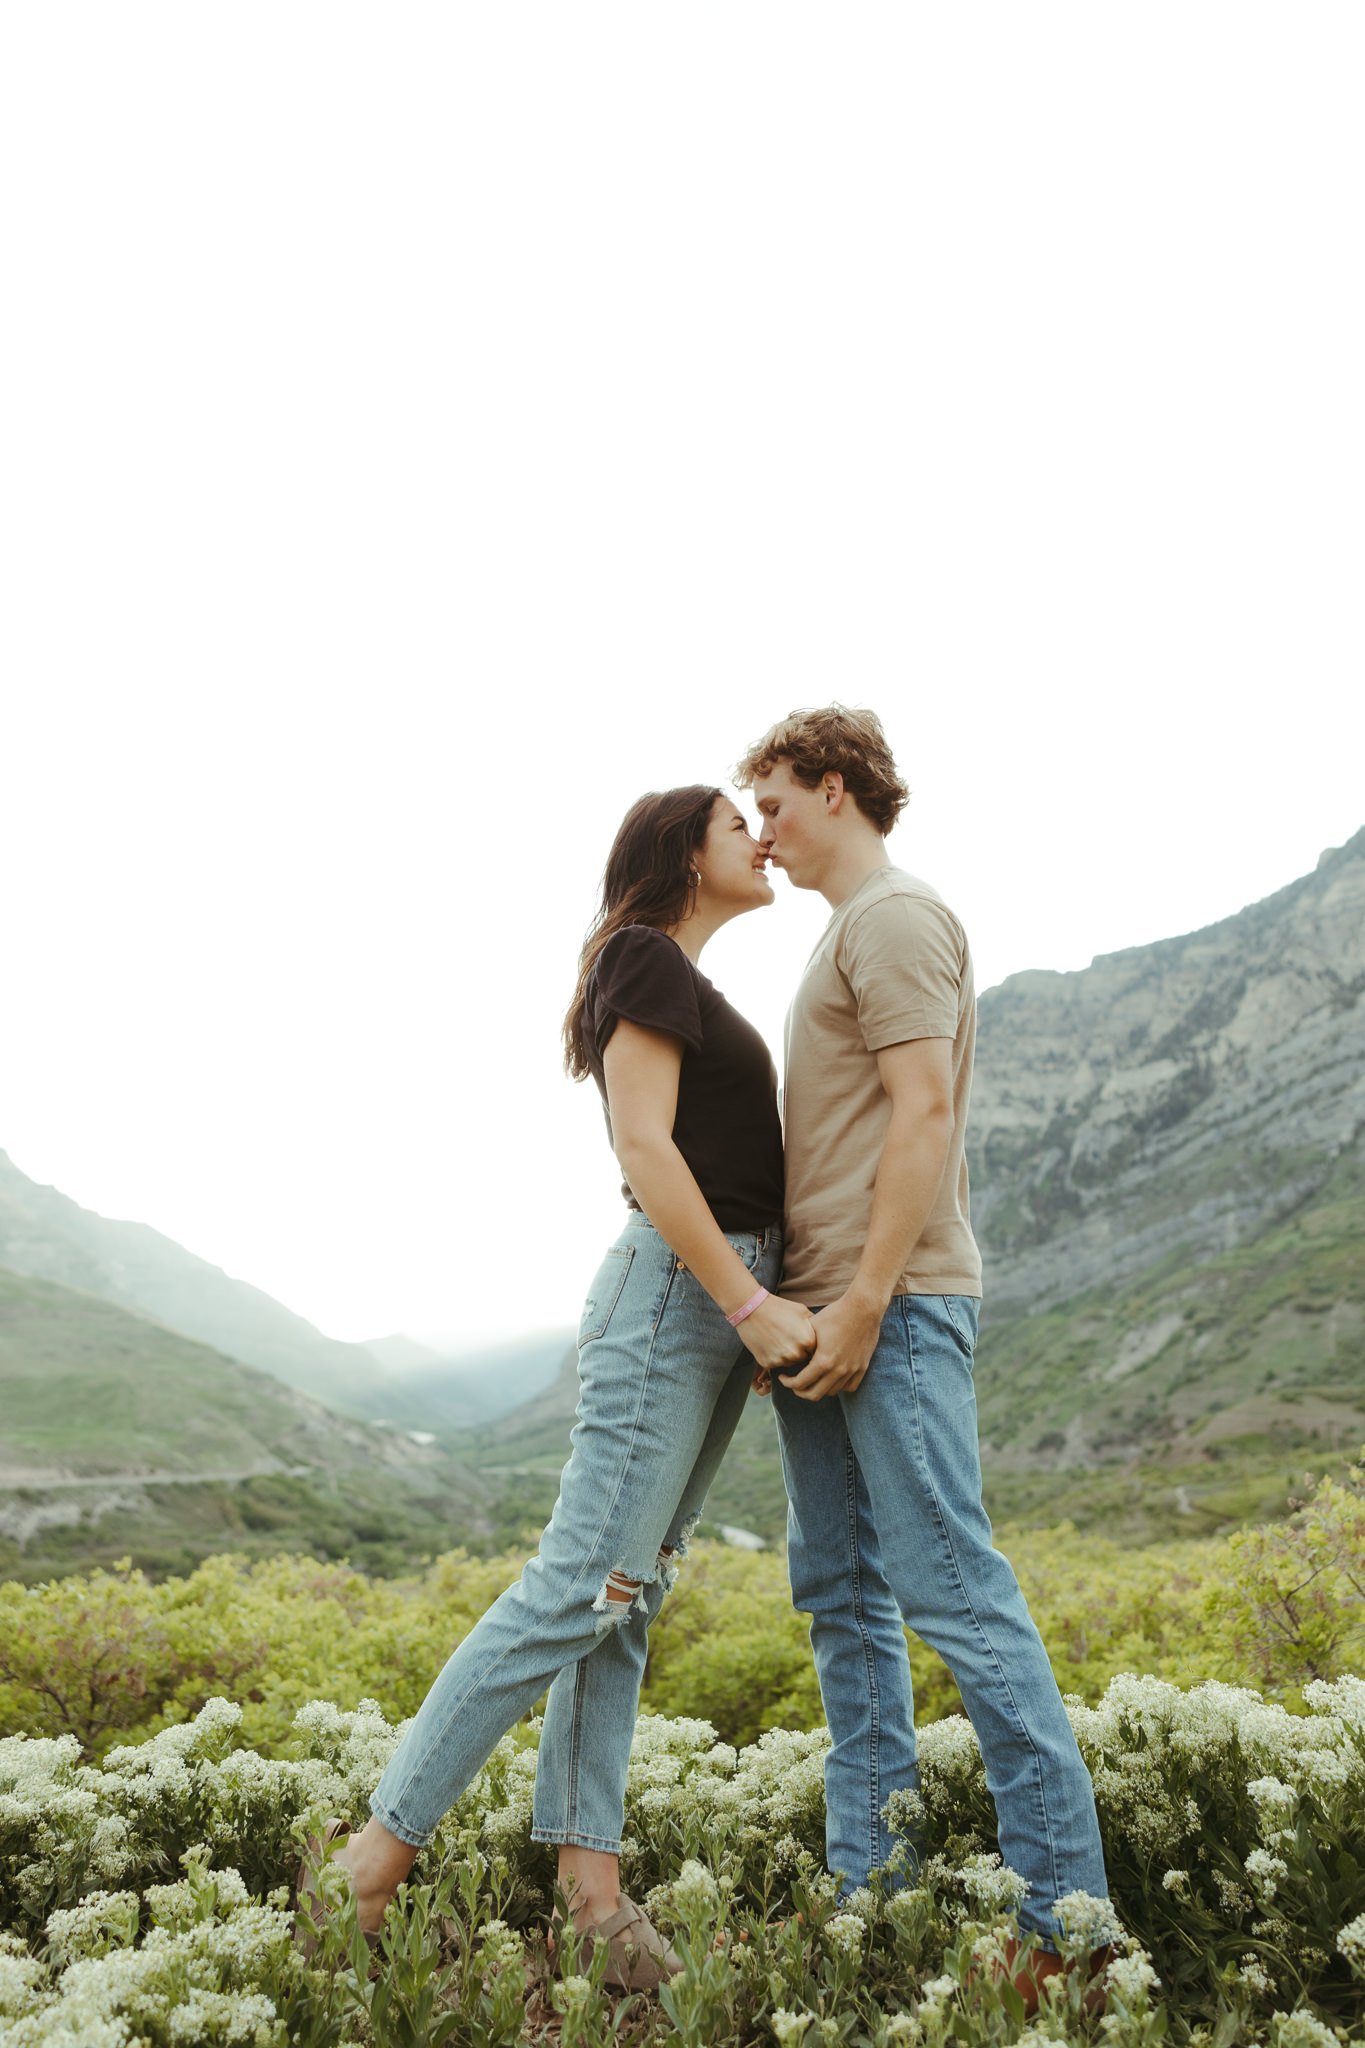 Spring-Provo-Canyon-Wildflowers-Engagement-Session-22